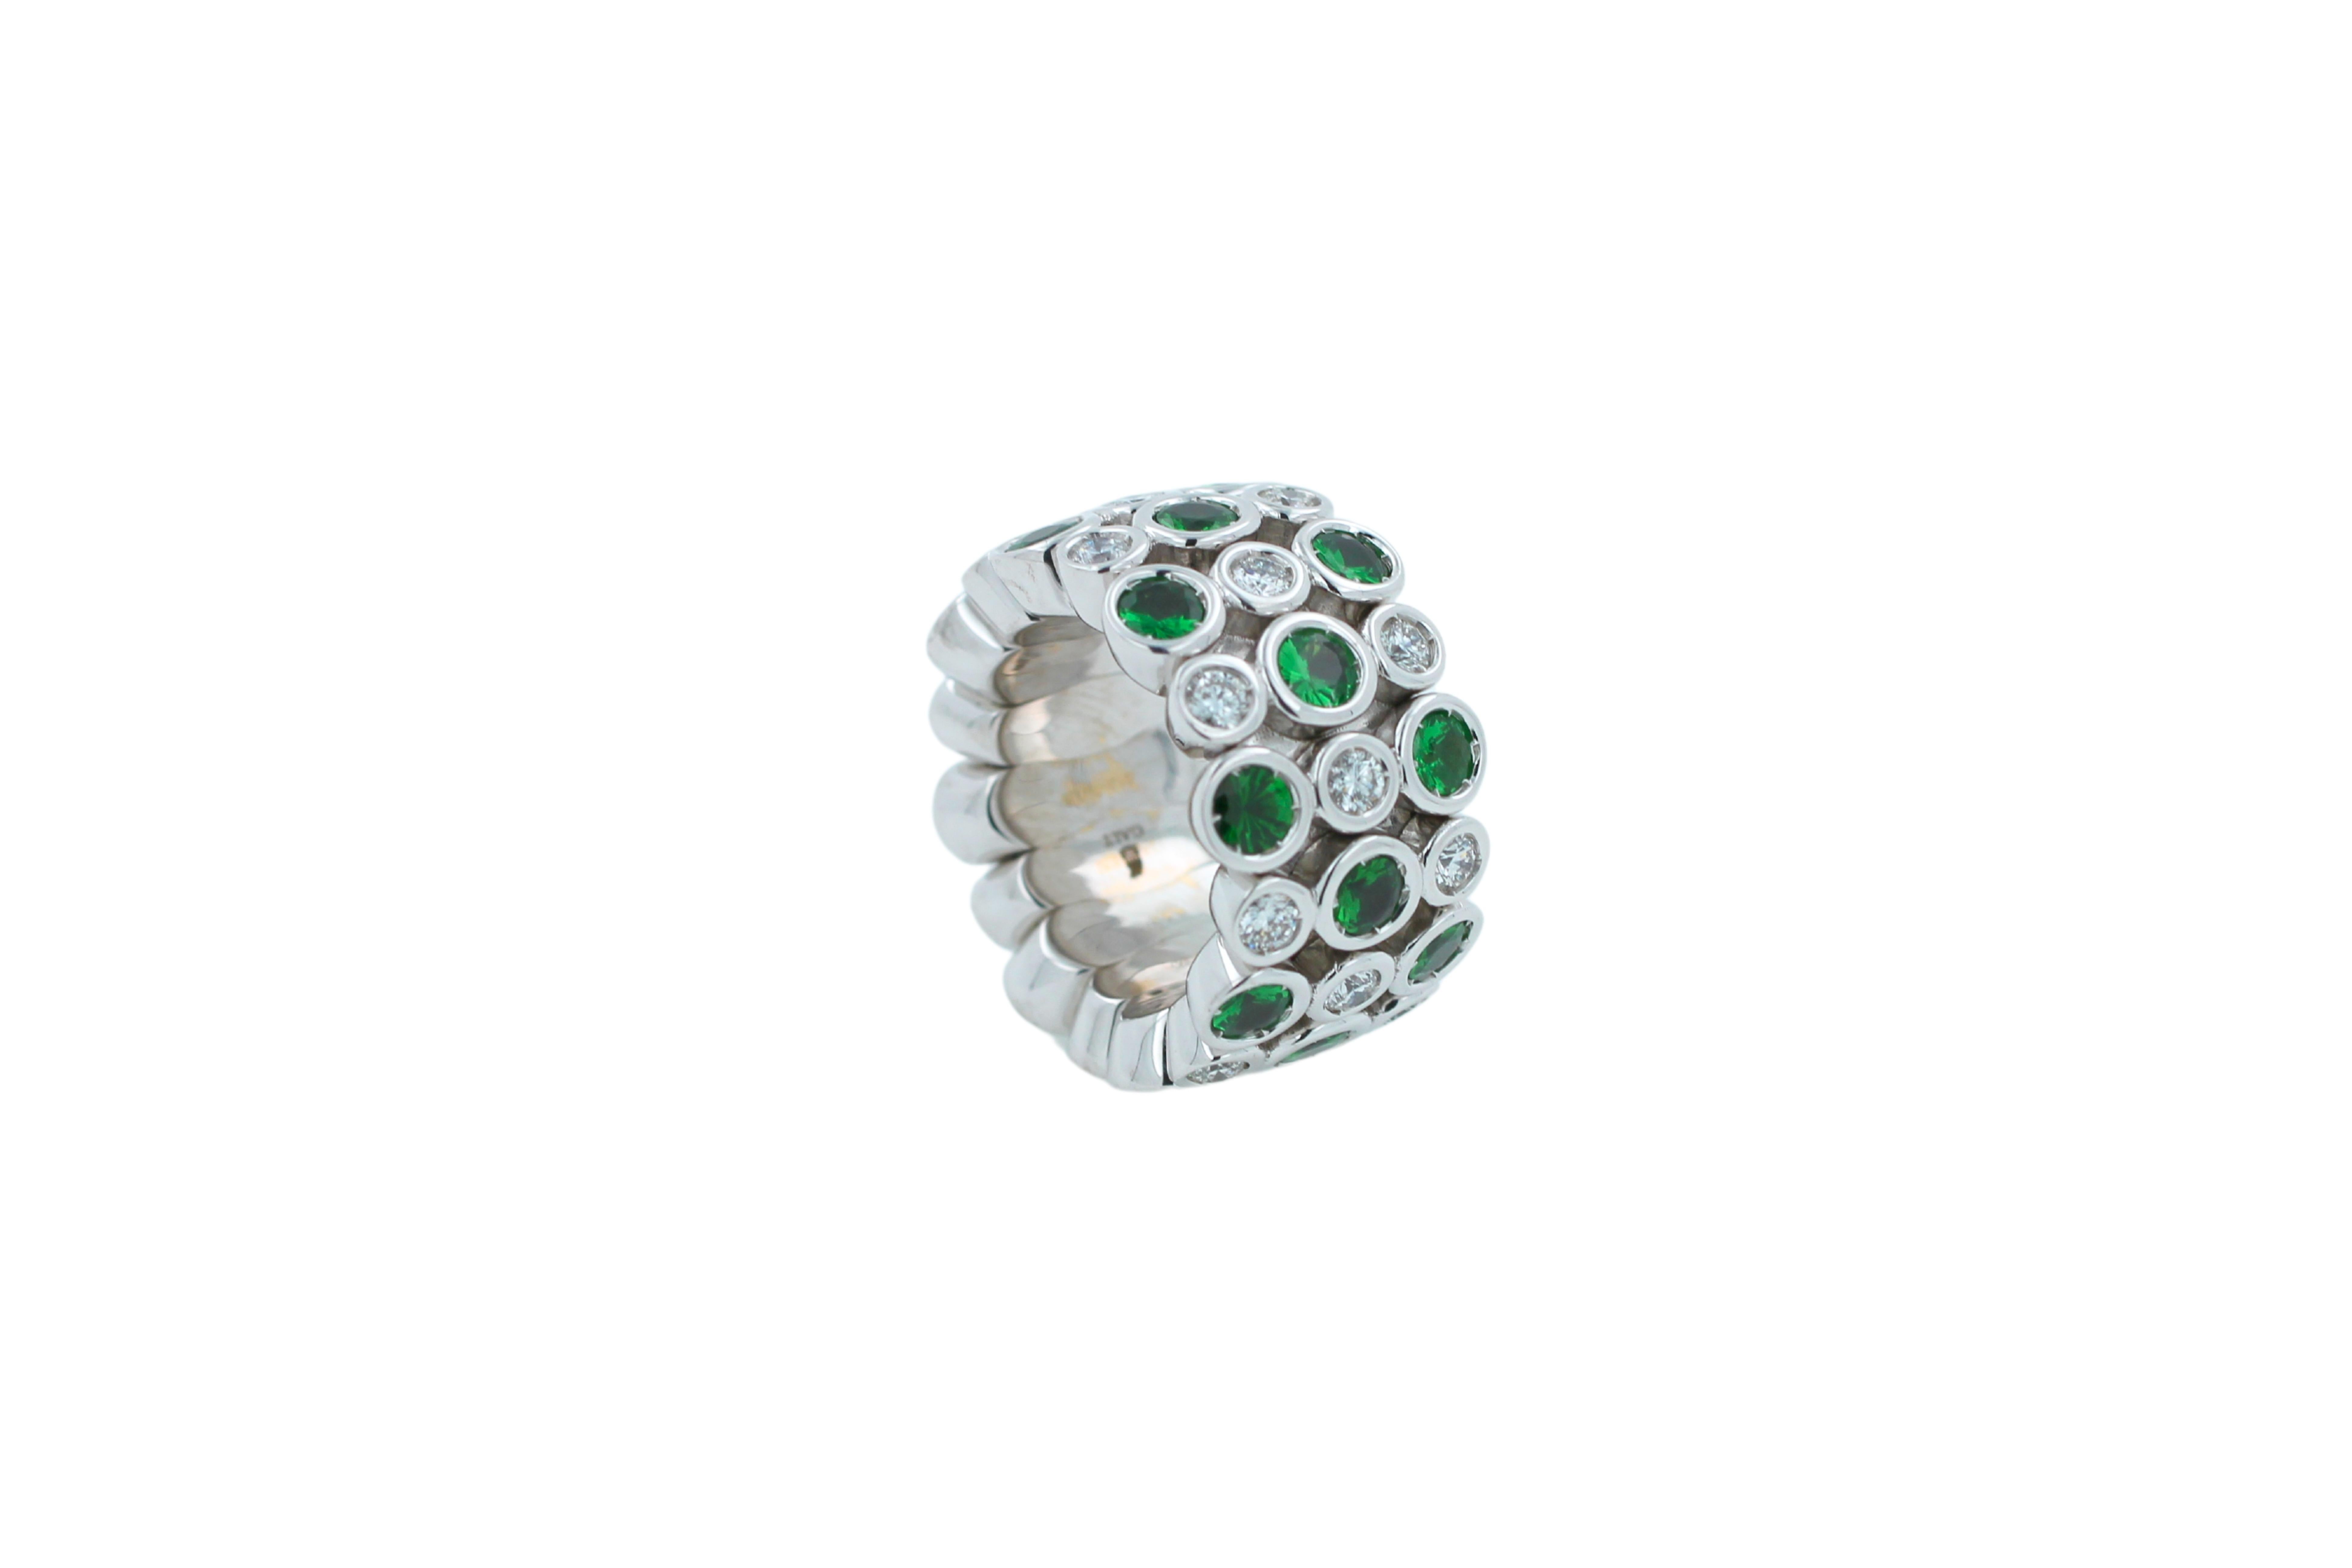 Multi Color Green Eternity Patterns Ring

Green Tsavorite Diamond Flexible Bezel Eternity Band 18 Karat White Gold Ring

Jewels inspired by the colourful Art Deco movement. Lively designs and colorful Interpretations in a triple row eternity band